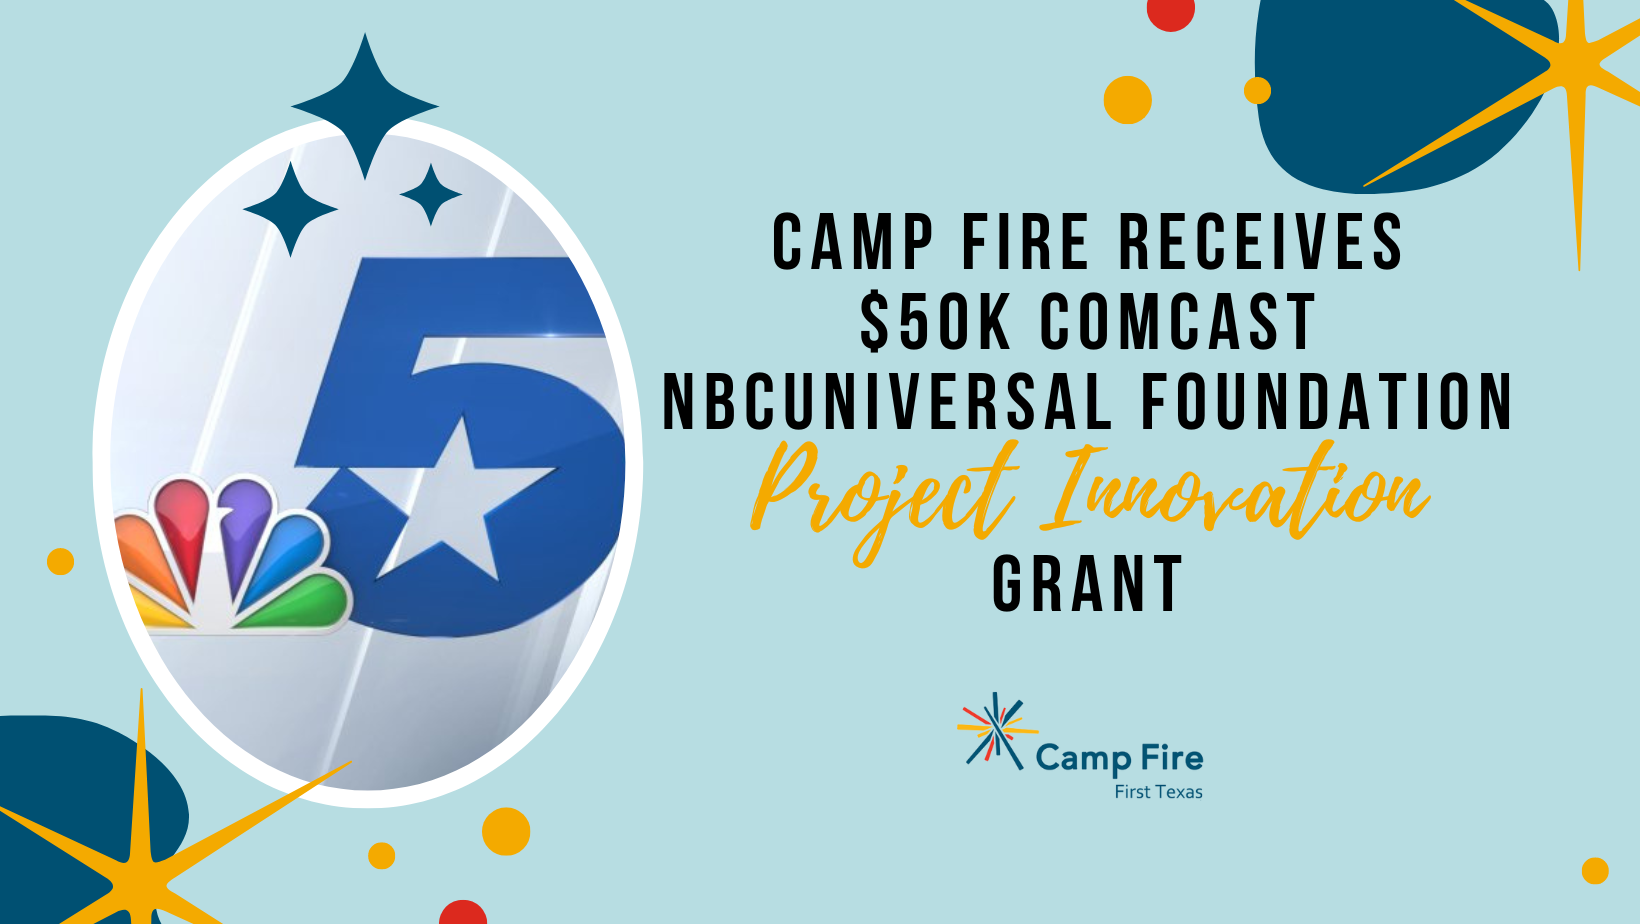 Camp Fire Receives $50K Comcast NBCUniversal Foundation Project Innovation Grant, a Camp Fire First Texas blog